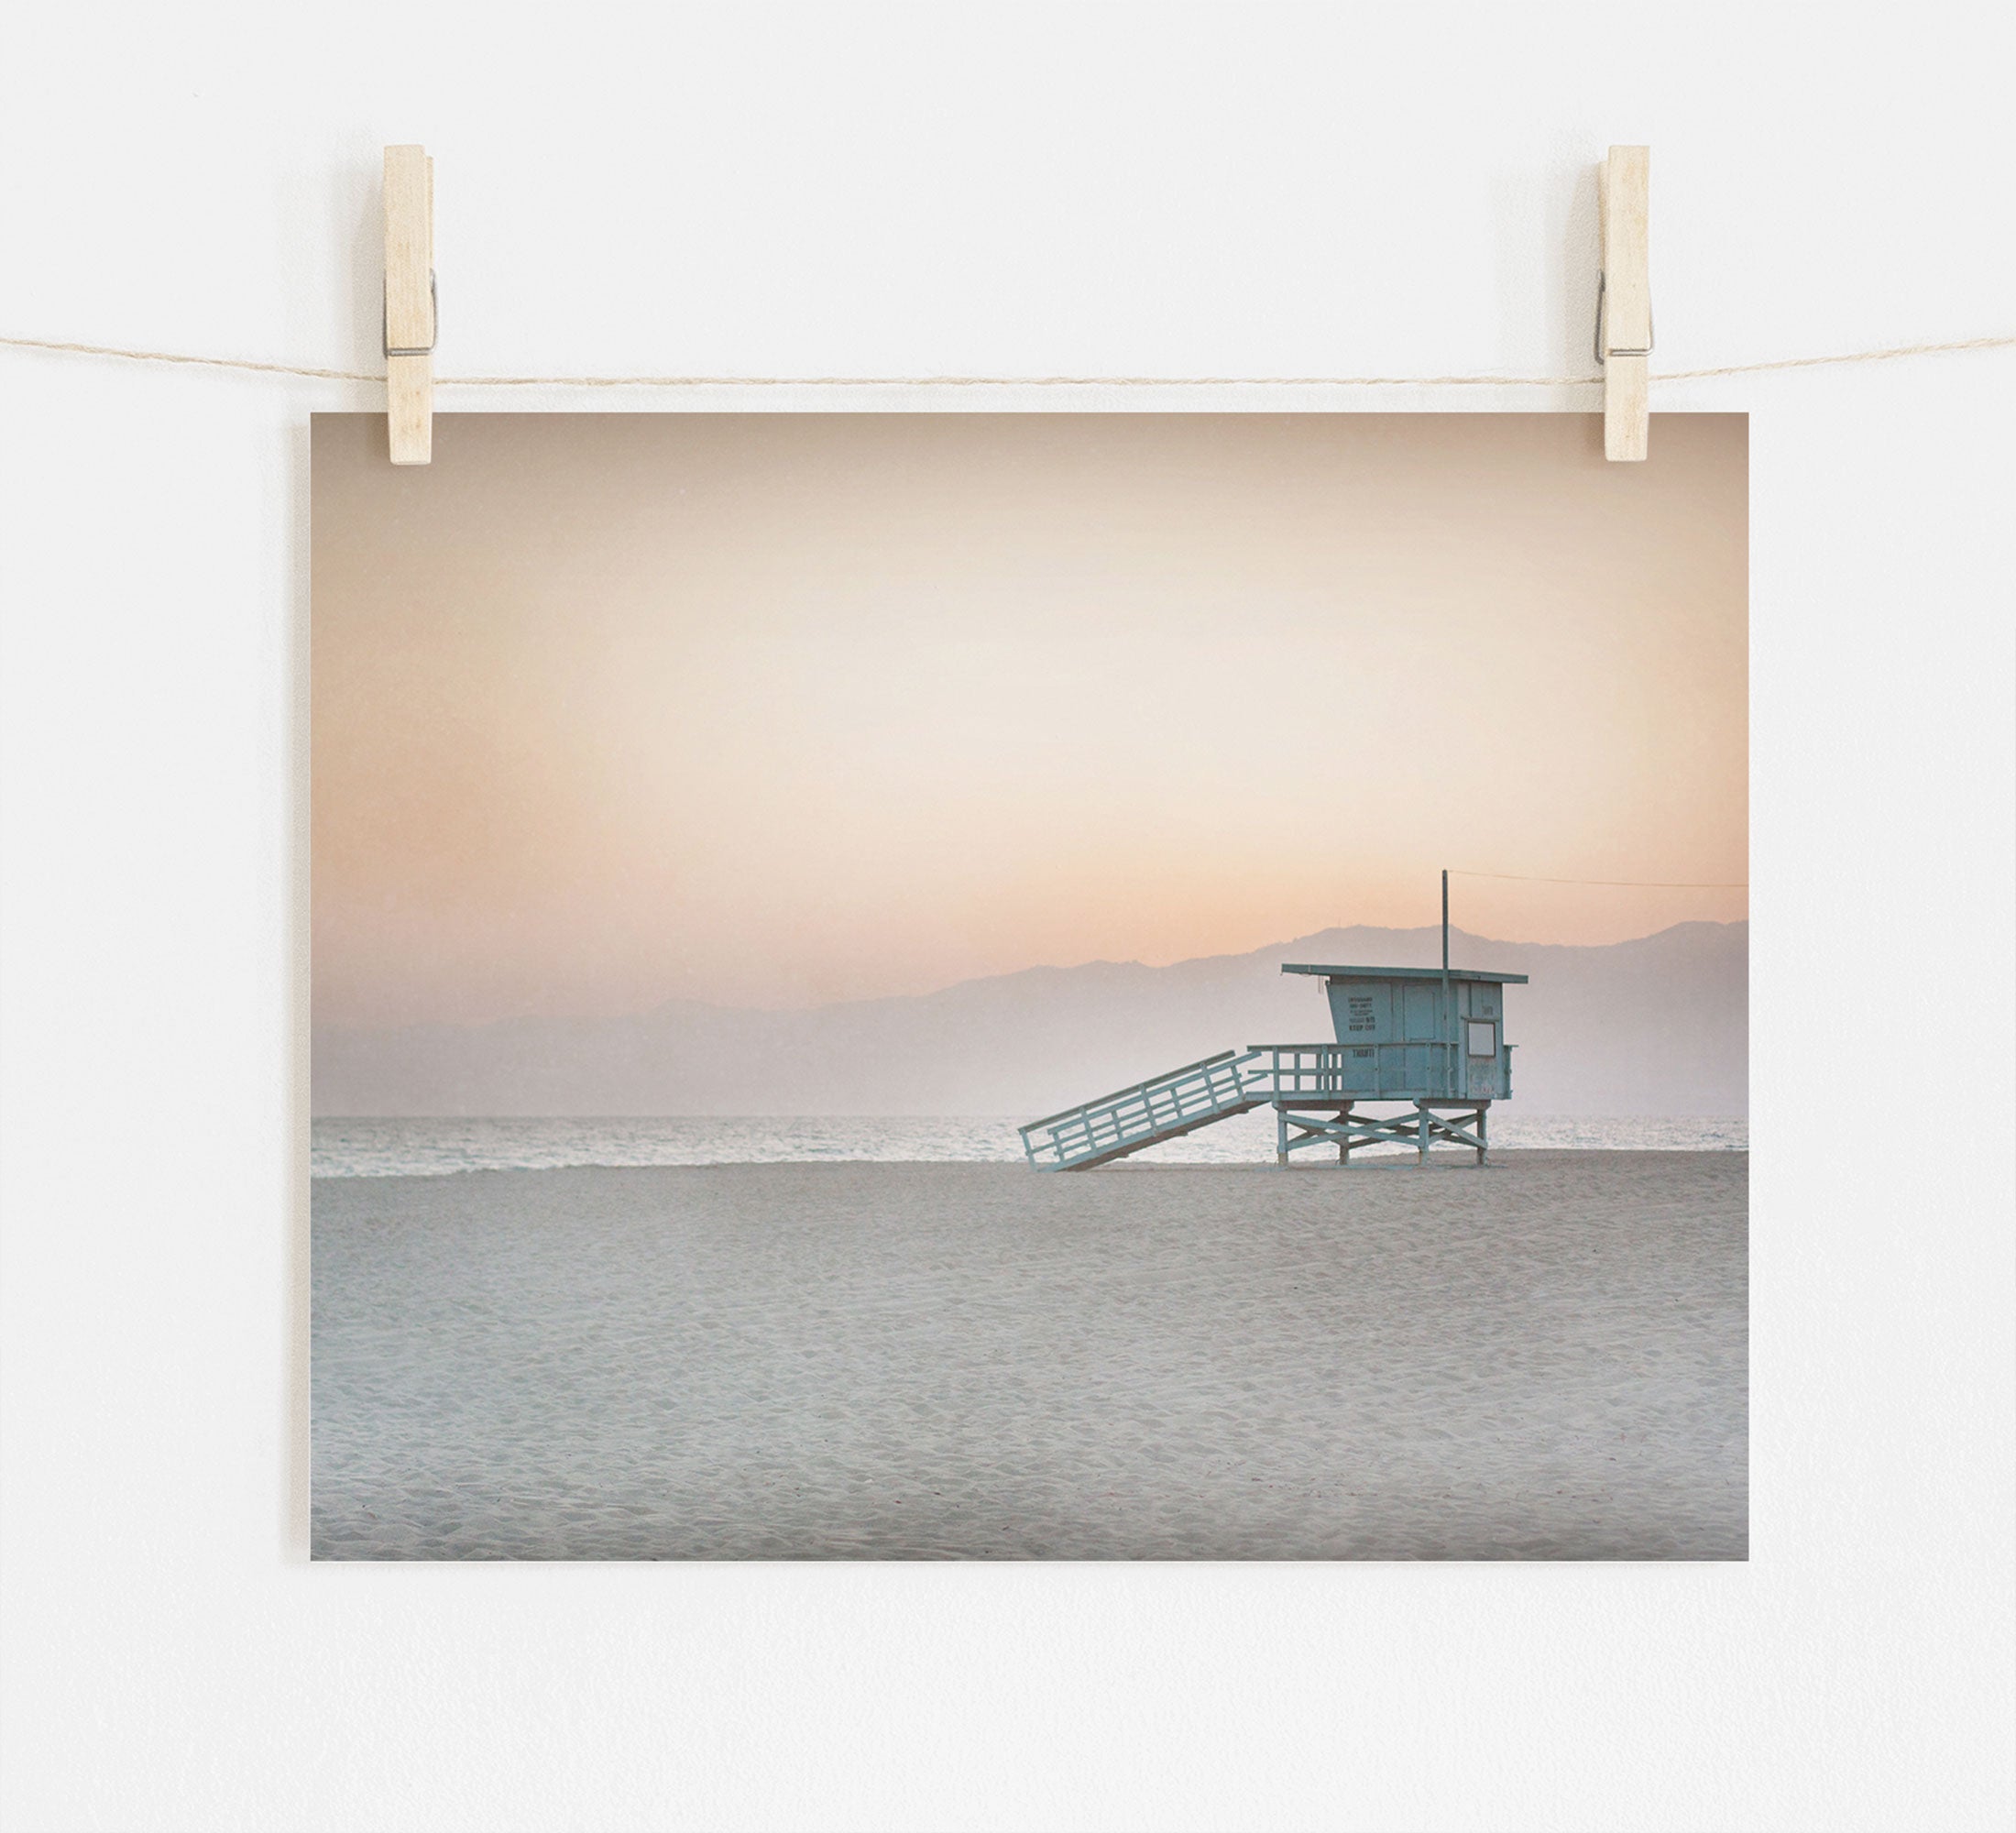 A serene beach scene at dusk printed on archival photographic paper, hung by clips on a string against a white wall. It features the Offley Green Pink Coastal Print, &#39;Lifeguard Tower&#39; on an empty sandy beach near Venice and Santa Monica.